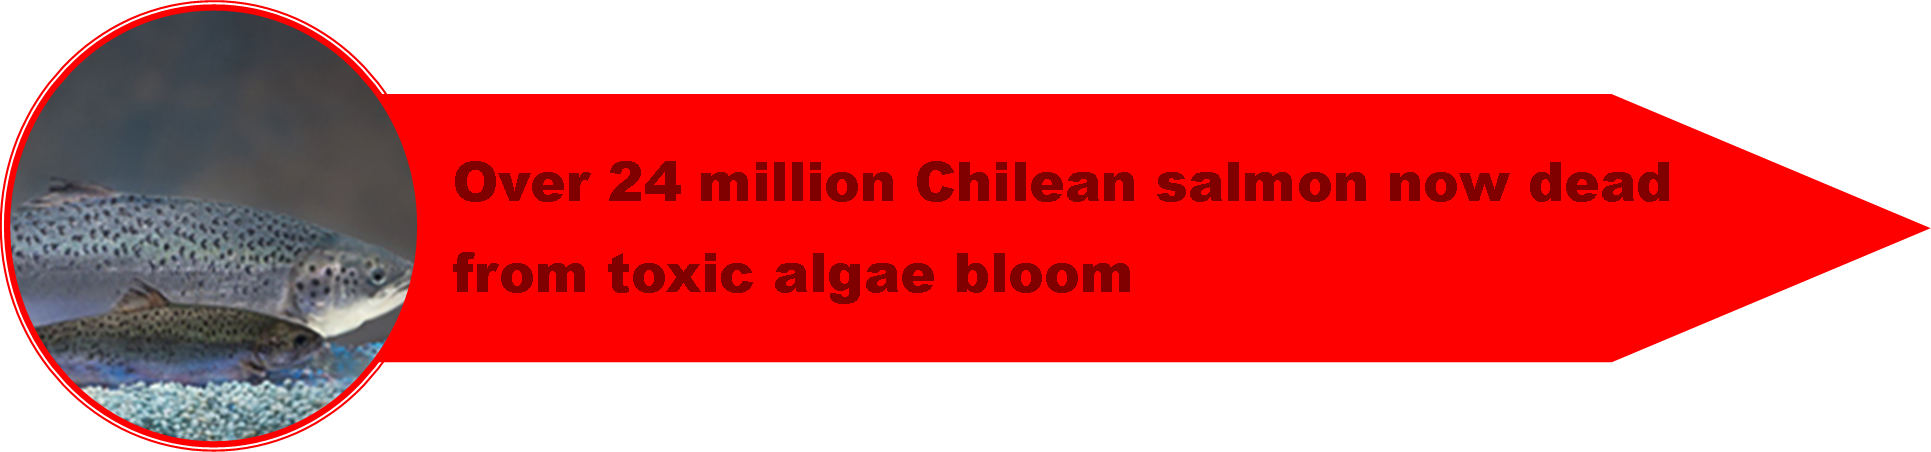 1_Chile_Crisis.png